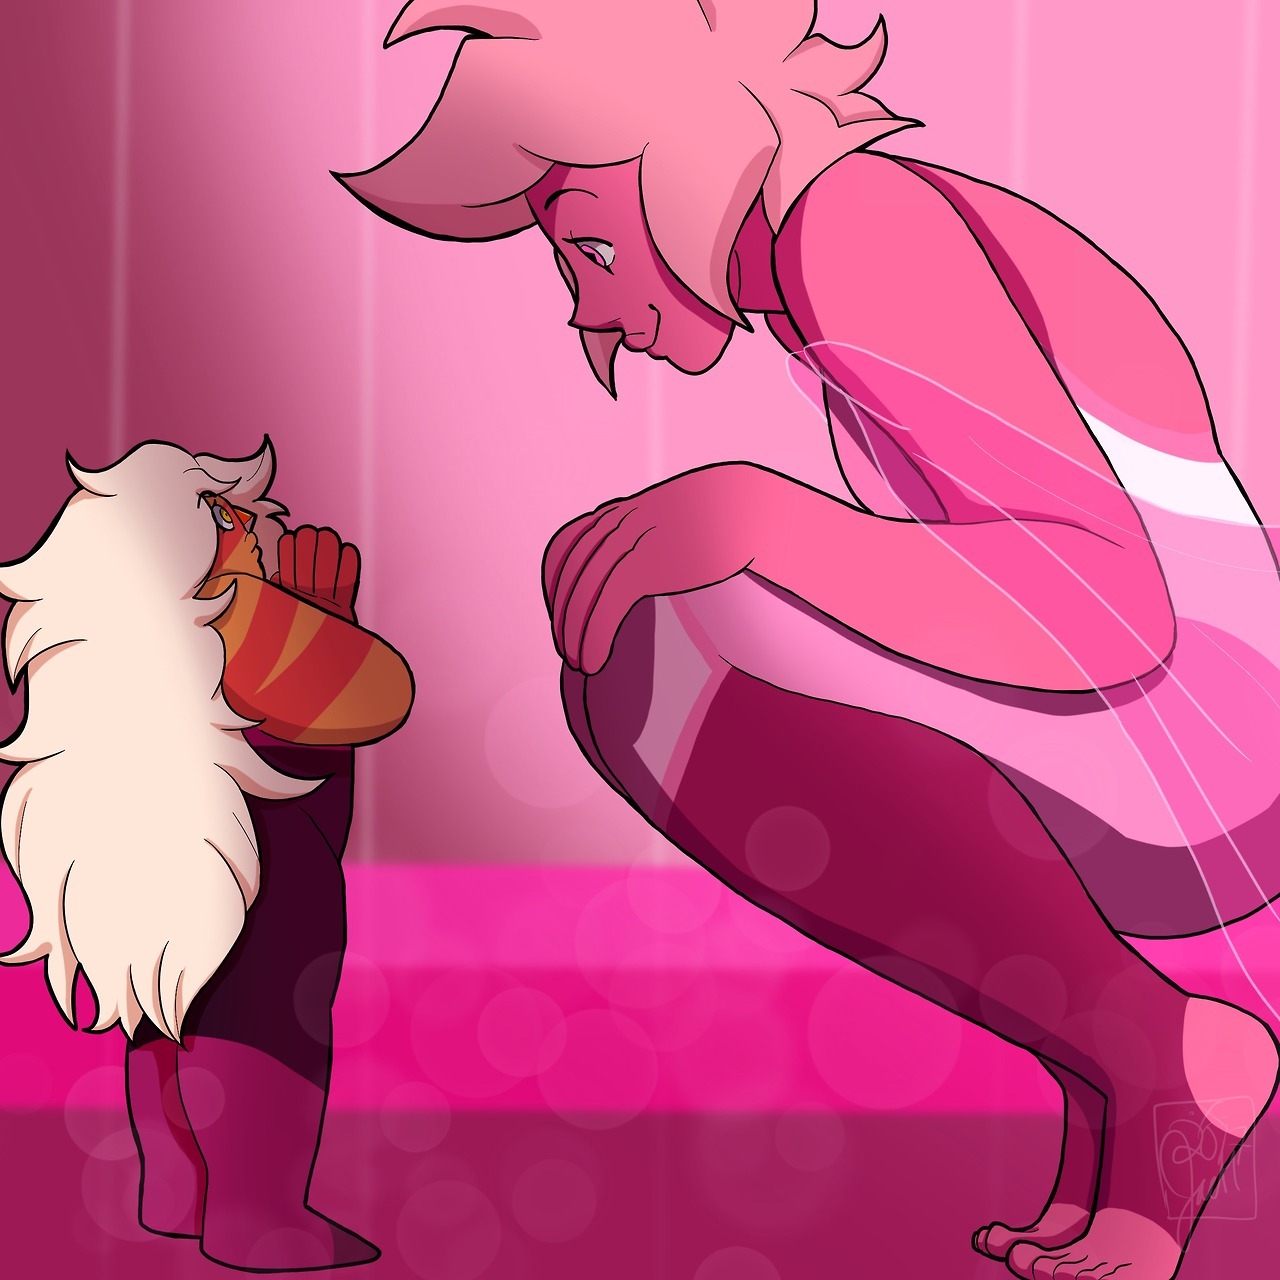 “Hello.” Aaaaaagh I hope we get to see Pink Diamond I wanna know so much about her! I also want to know more about Jasper’s past before Pink Diamond was shattered, as well as during the war…